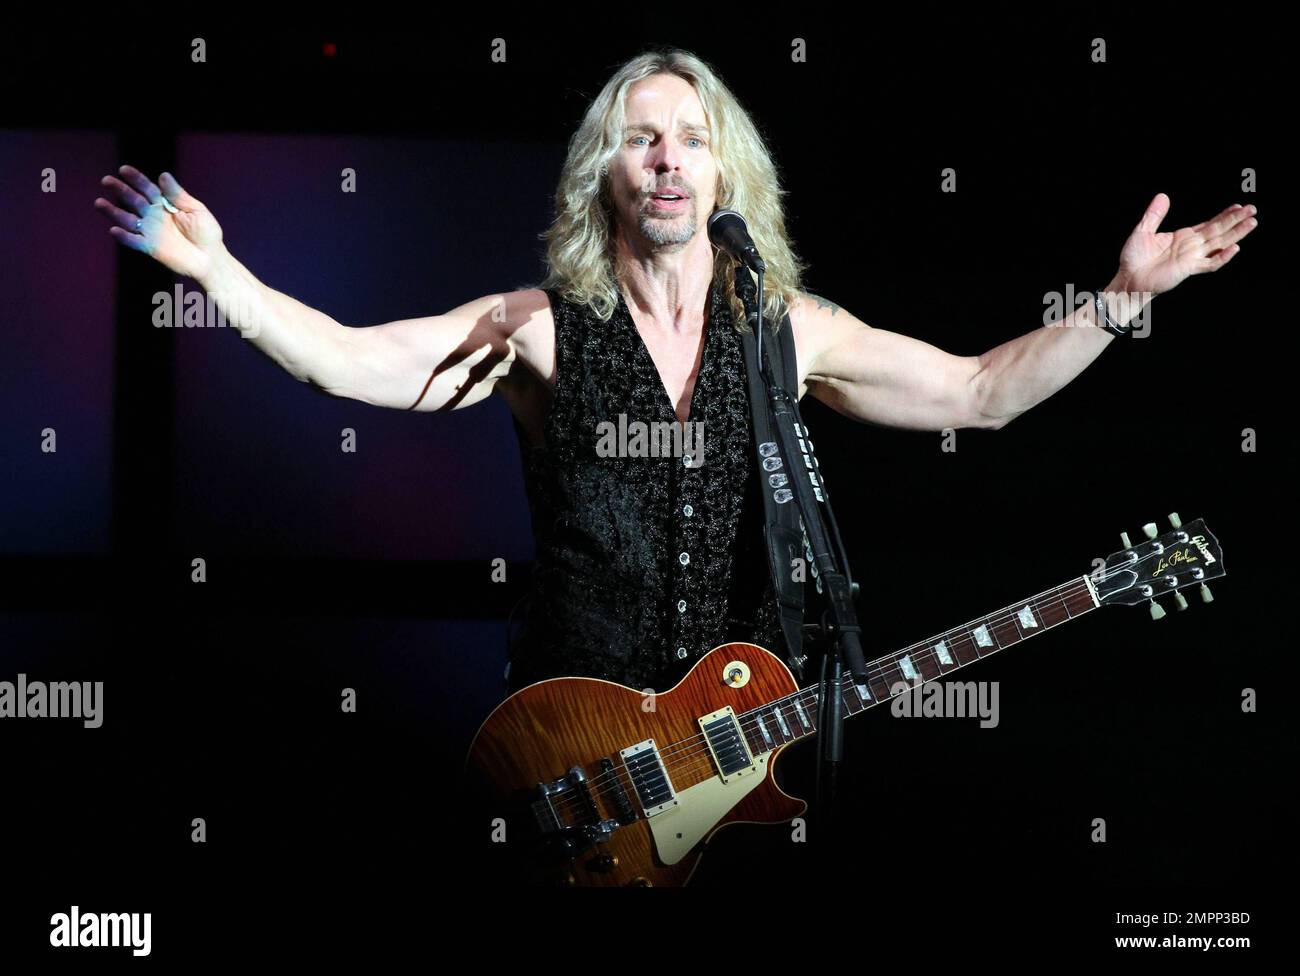 Tommy Shaw of the classic rock band Styx performs in concert at the Koka Booth Amphitheatre in Cary, NC. 16th September 2011. Stock Photo